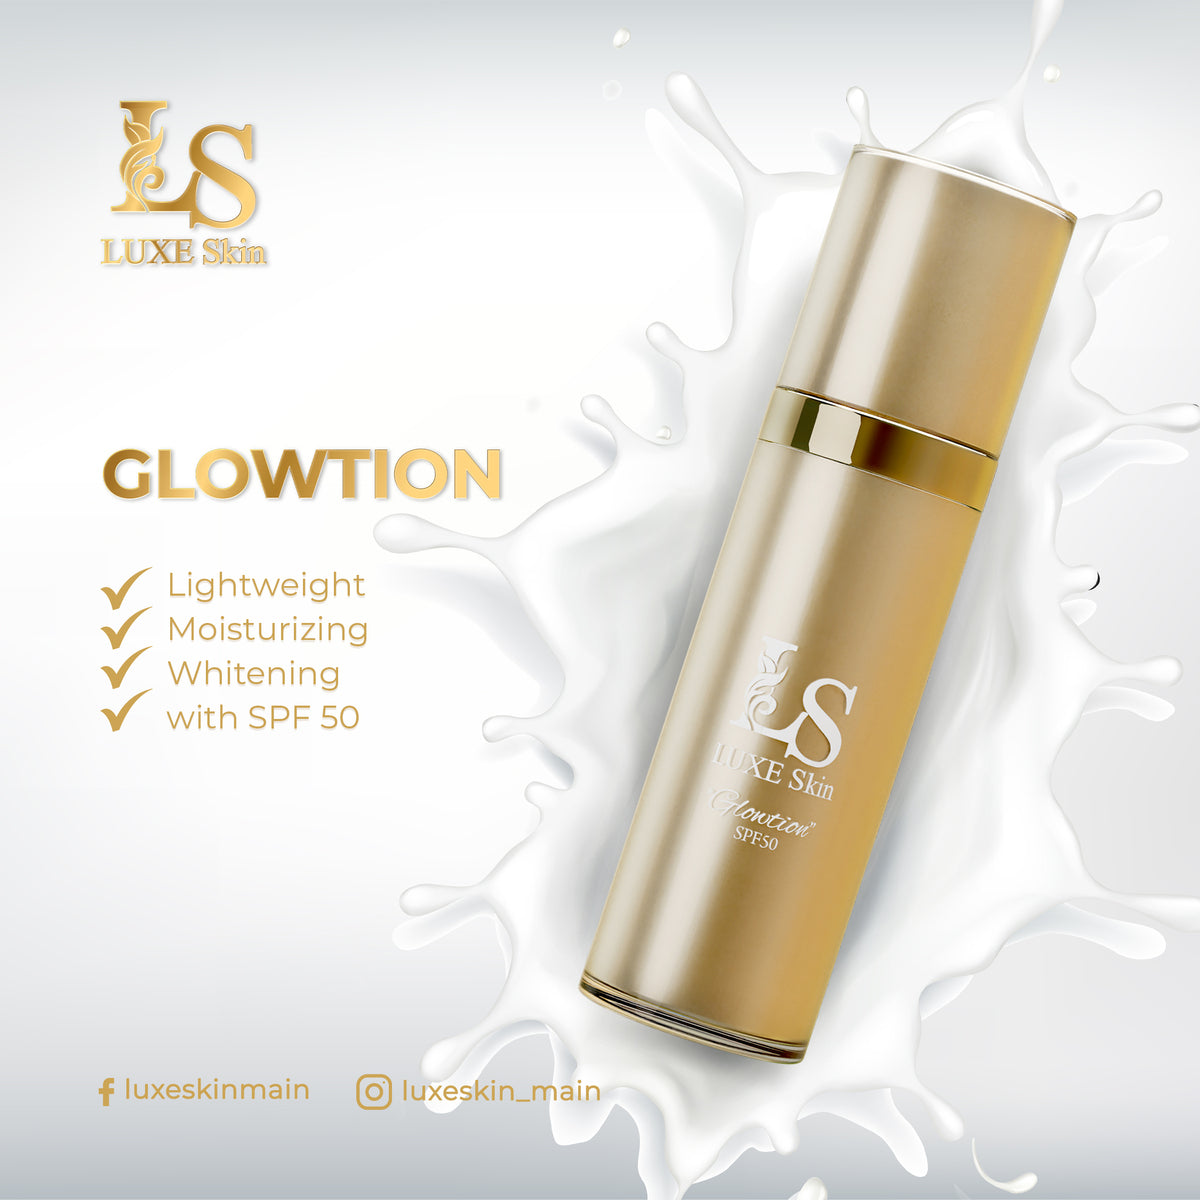 Luxe Skin - Luxe Glowtion Shimmer Whitening Lotion with SPF 50 - REFIL – My  Care Kits